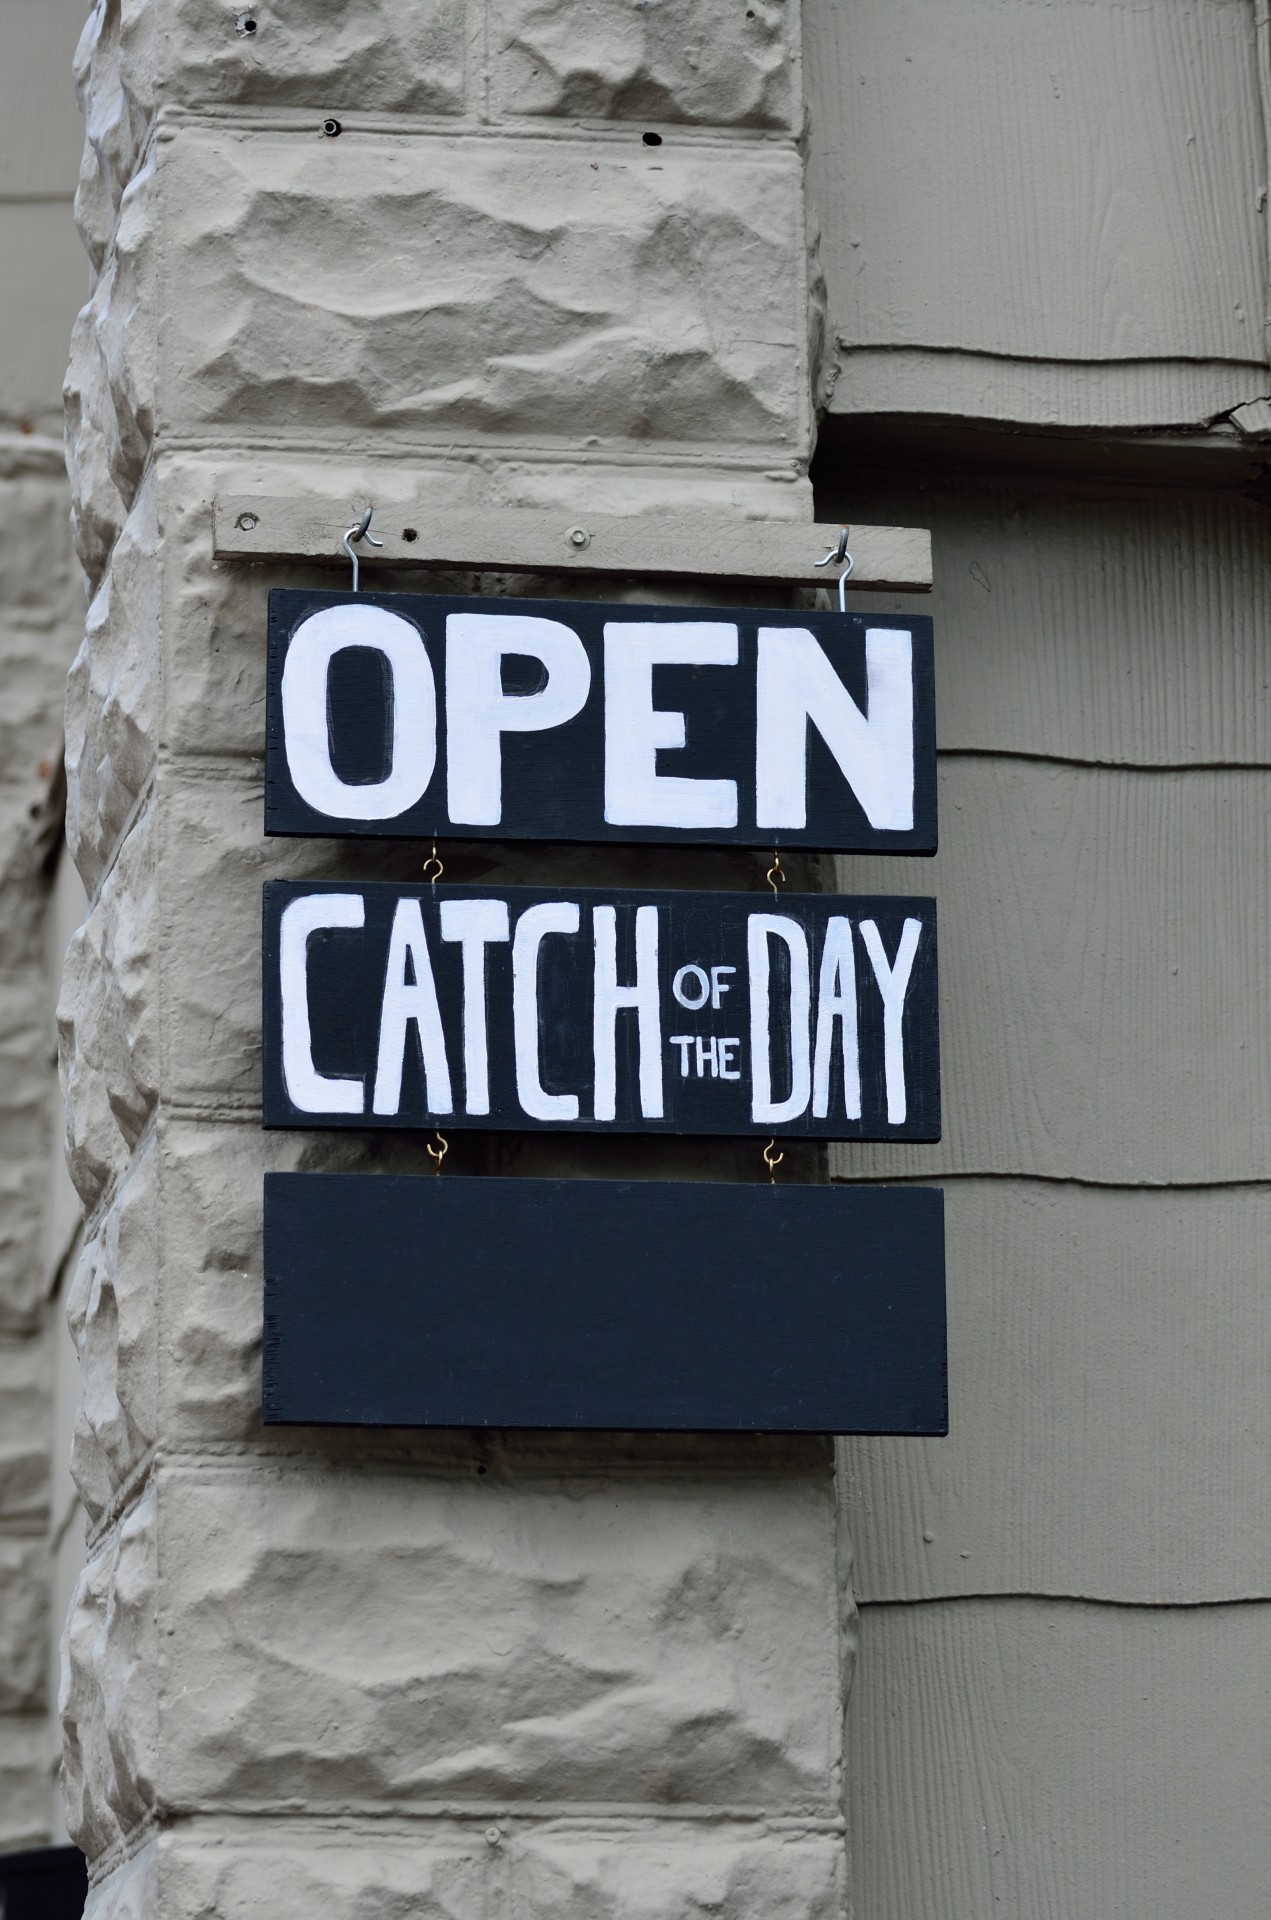 Open sign catch of day at restaurant